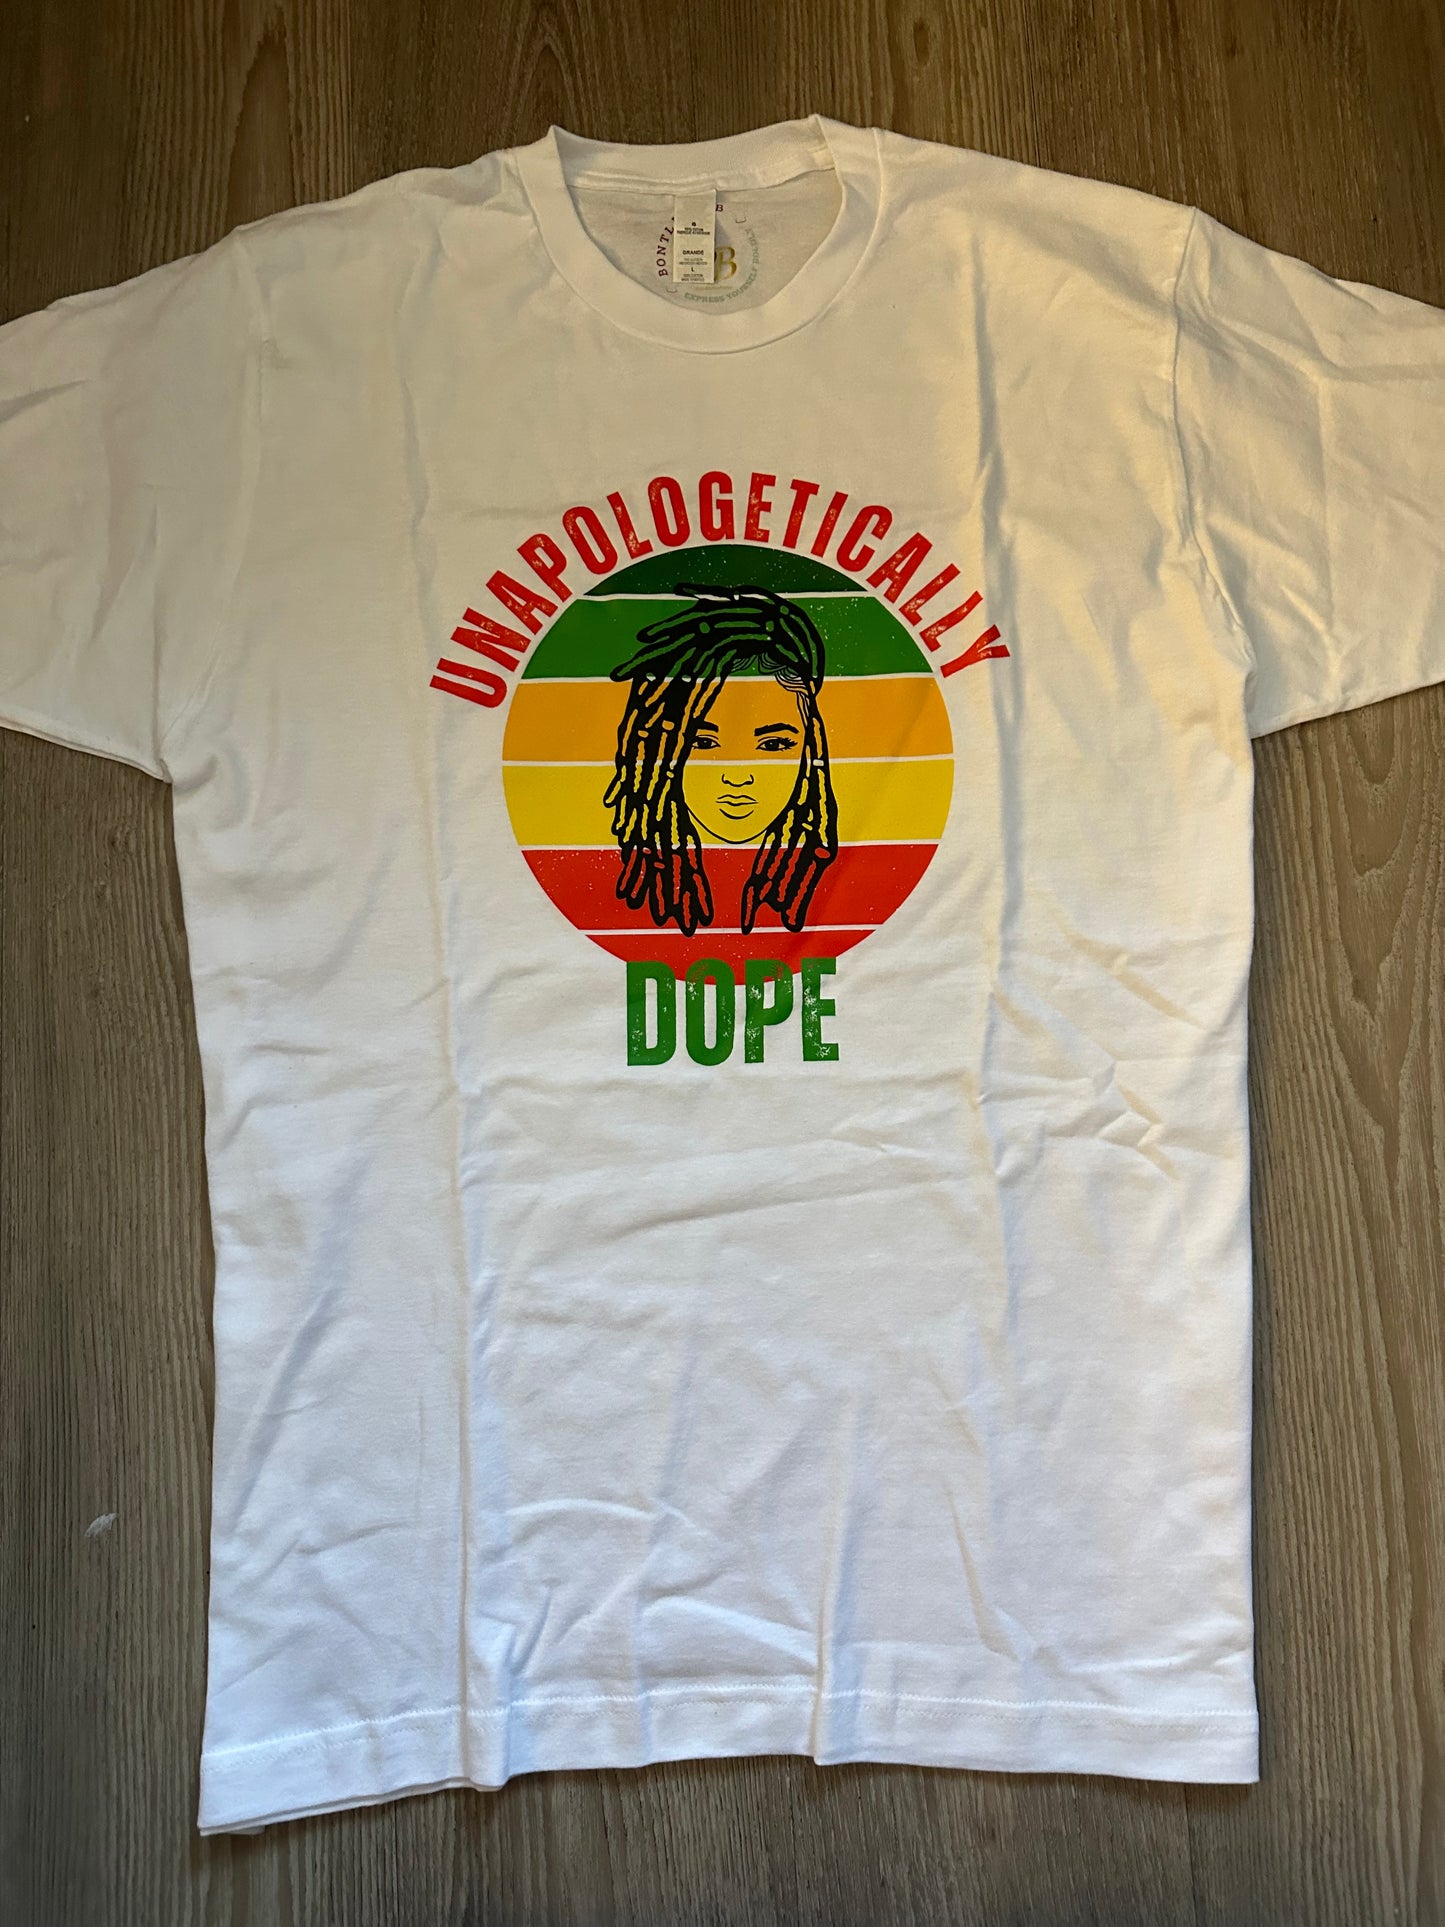 Unapologetically in Red text Dope in green text with green, orange, yellow, red retro circle with dreadlocks lady on top on a white shirt. Melanin Apparel. 